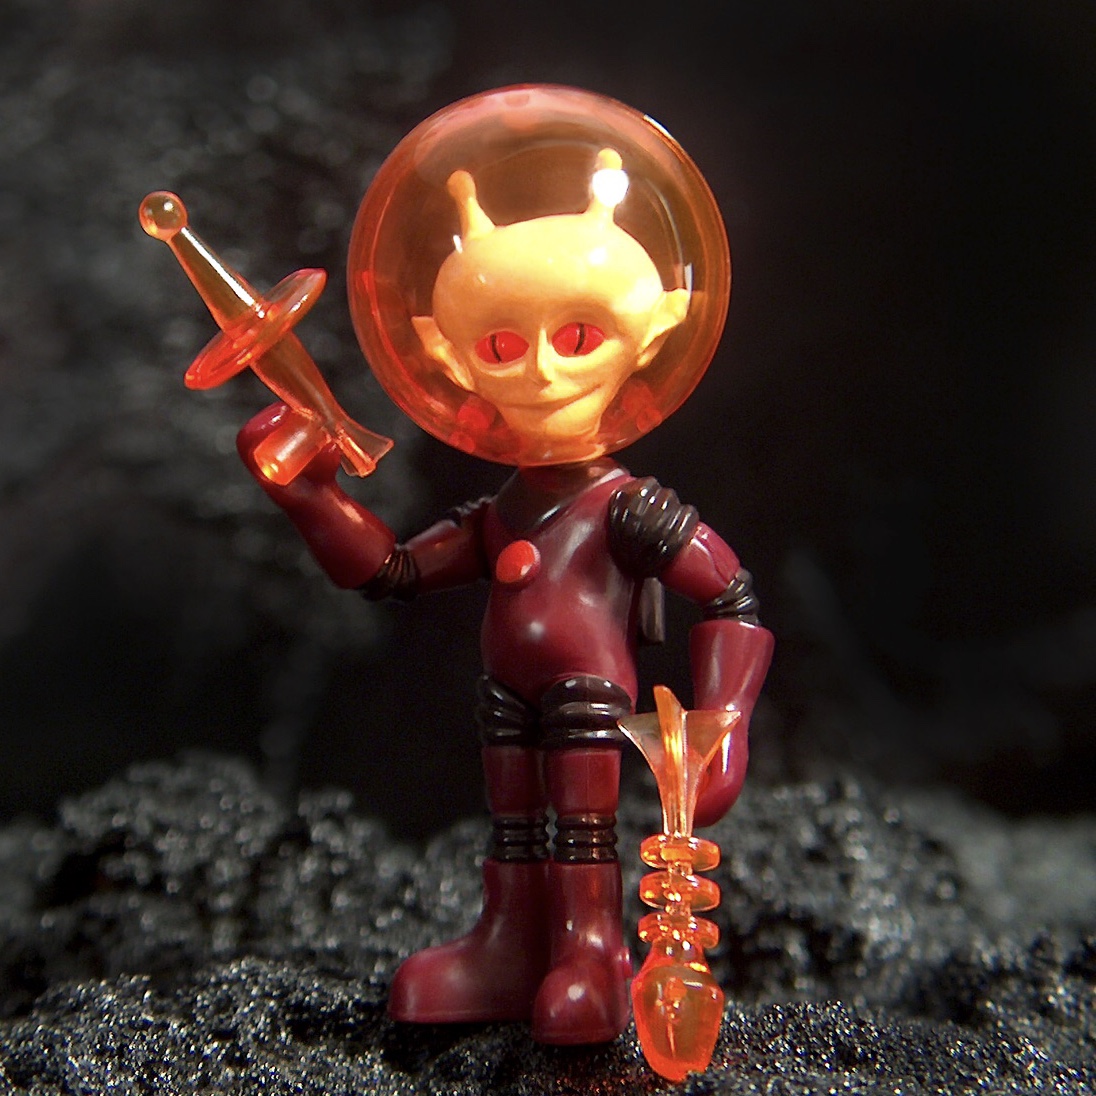 A figure in a ALPHA 7 2016 ZEKROYAS ONELL COSMIC CREATOR EXCLUSIVE LIMITED EDITION space suit holding a knife.